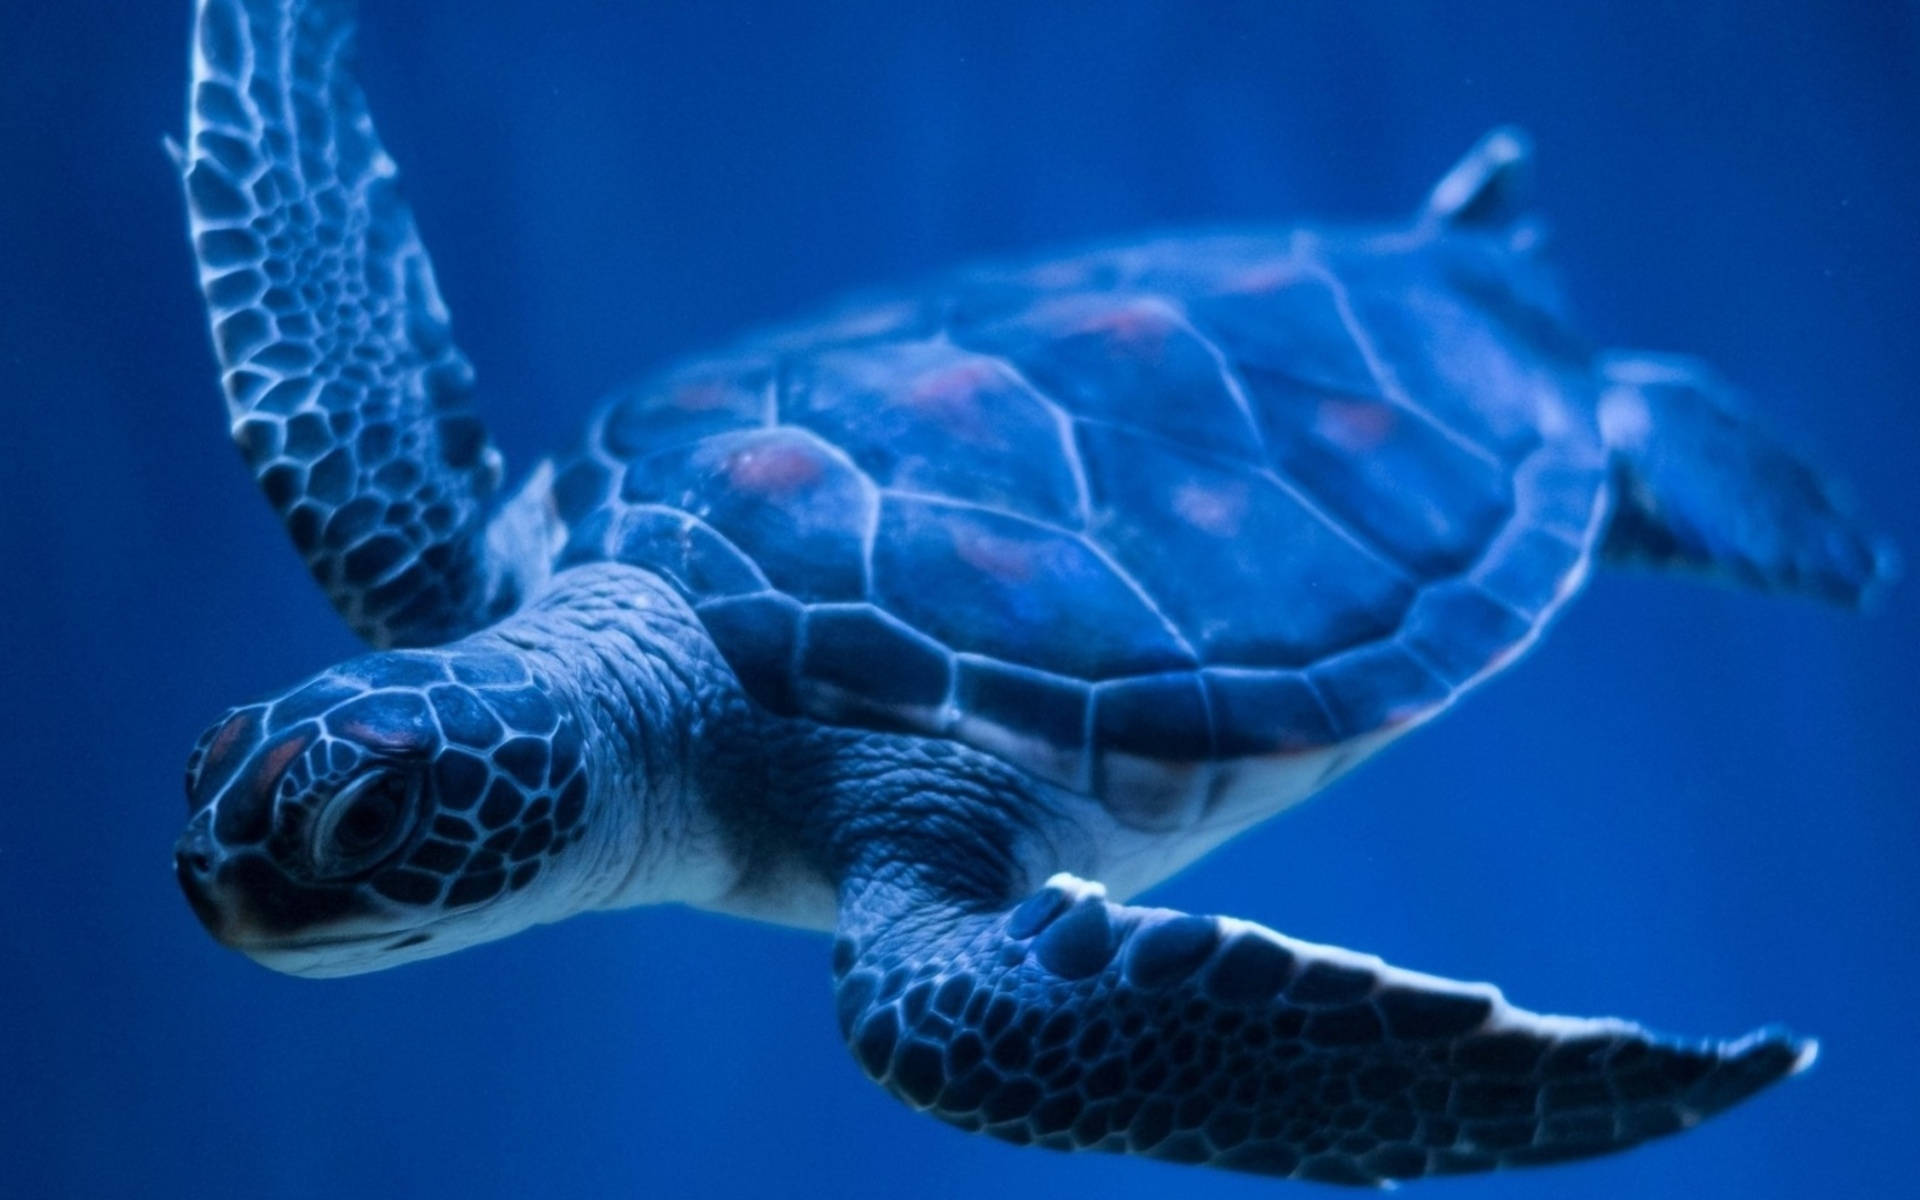 Cool Turtle Under The Blue Sea Wallpaper